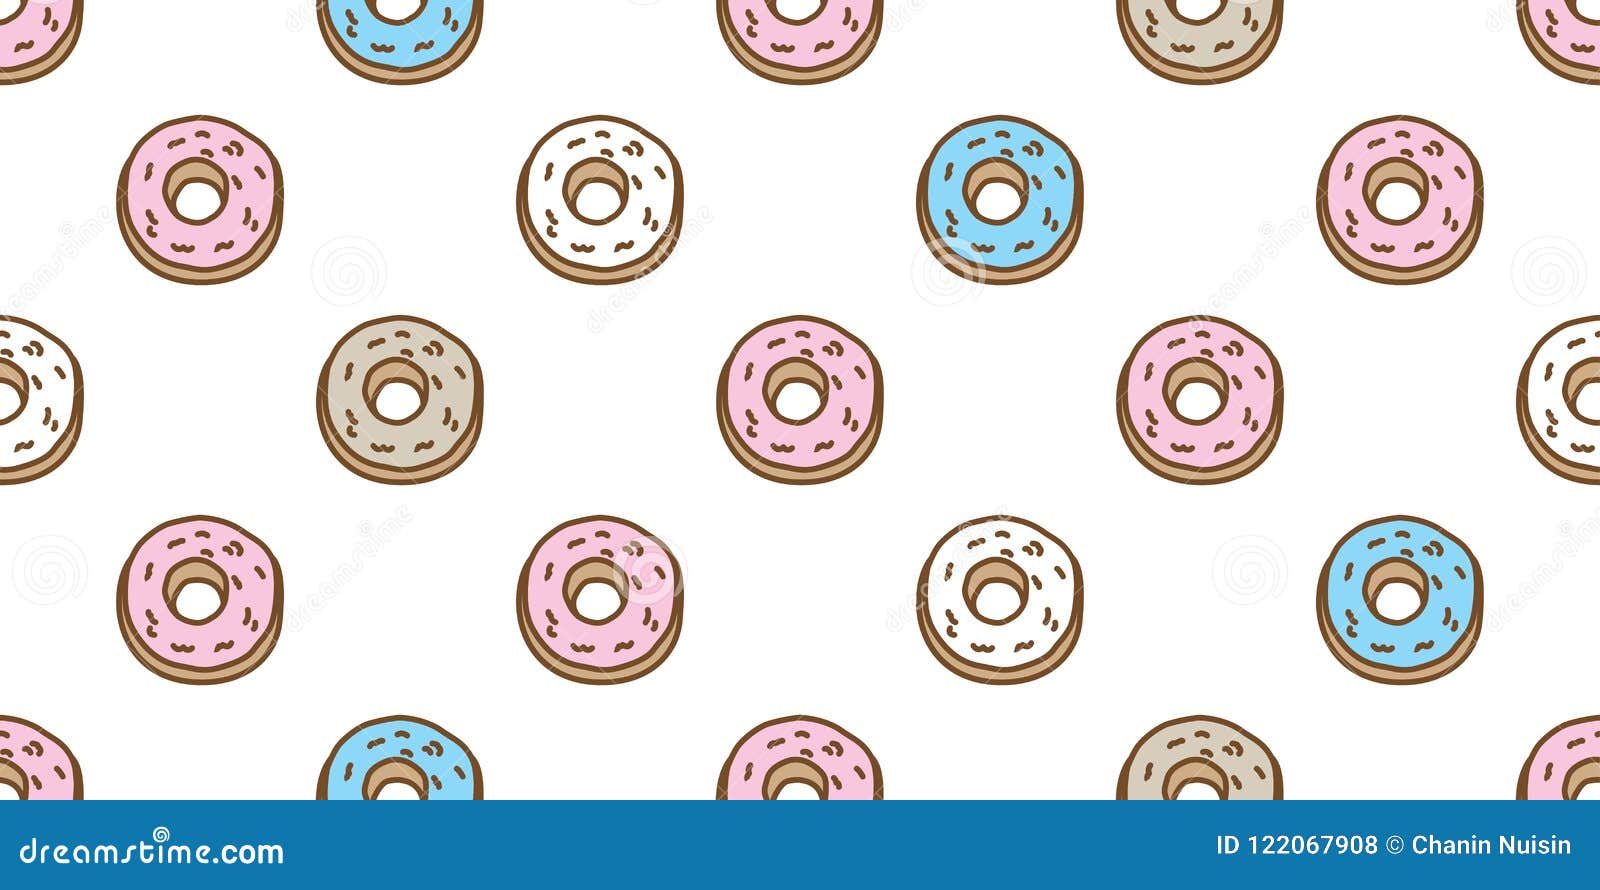 Donuts Seamless Pattern Vector Cake Isolated Background Wallpaper Doodle  Stock Illustration - Illustration of character, drawn: 122067908